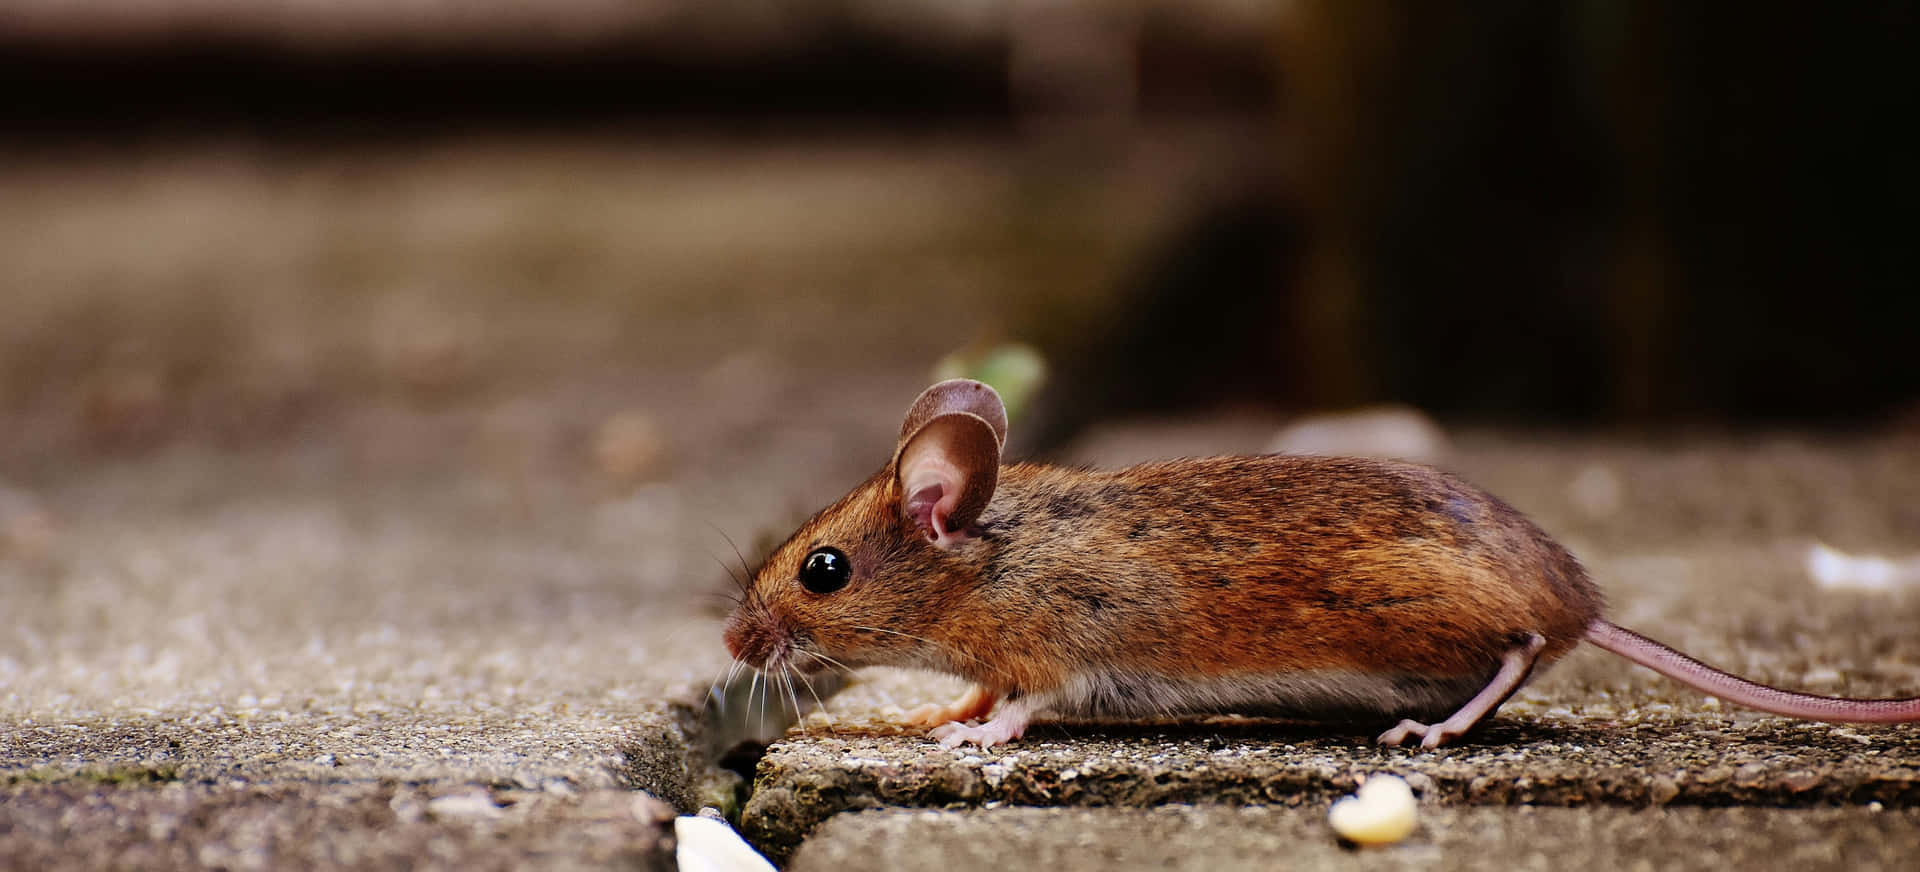 Brown Mouse Outdoors Wallpaper